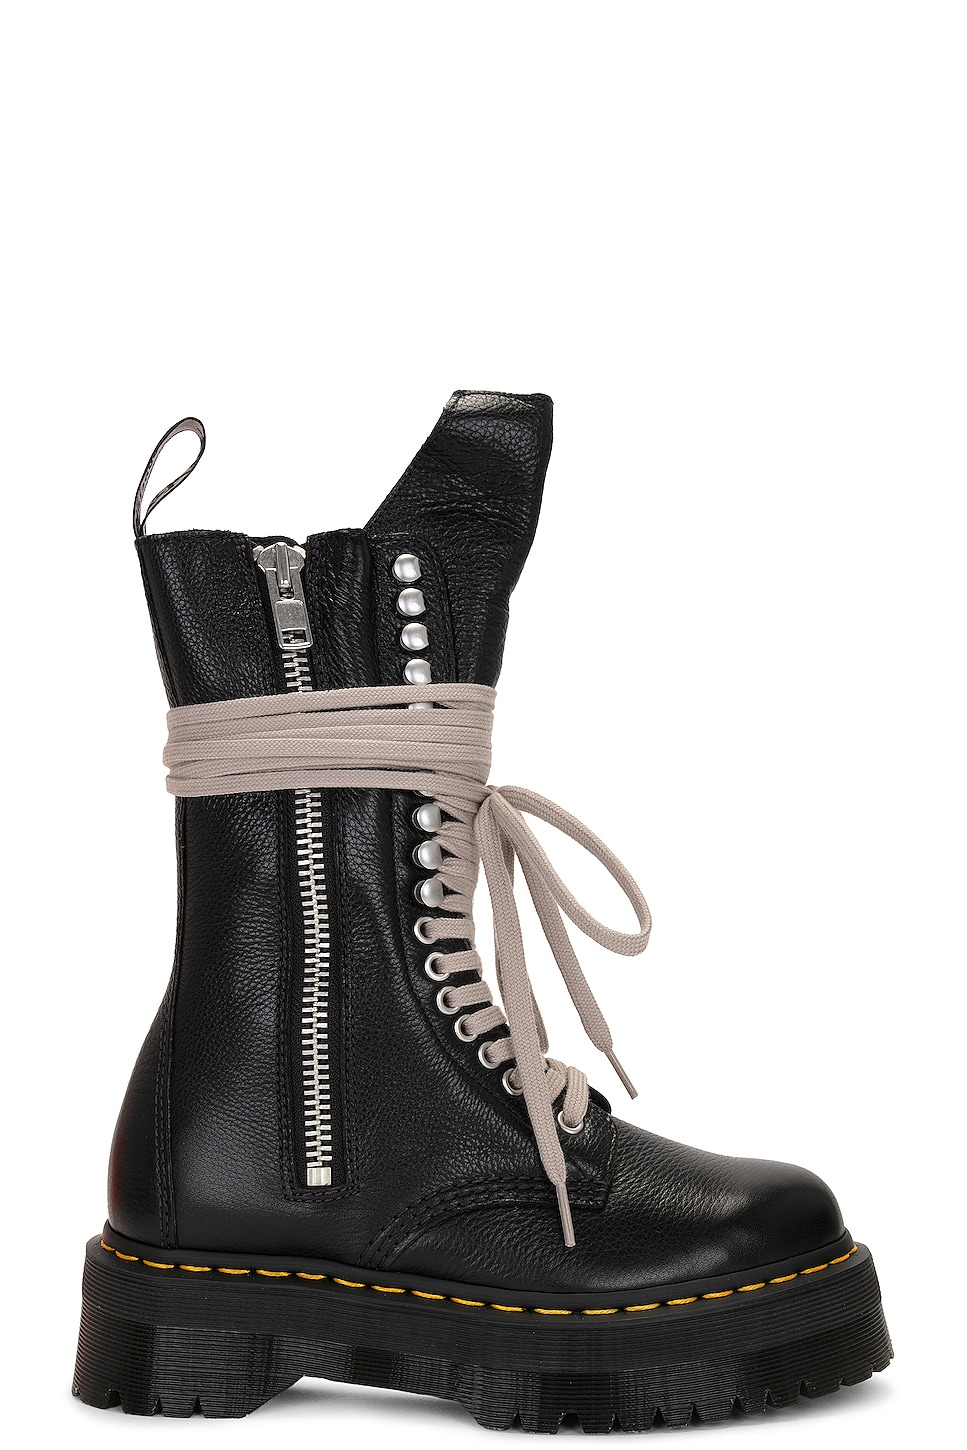 Image 1 of Rick Owens x Dr Martens Quad Sole Calf Length Boot in Black